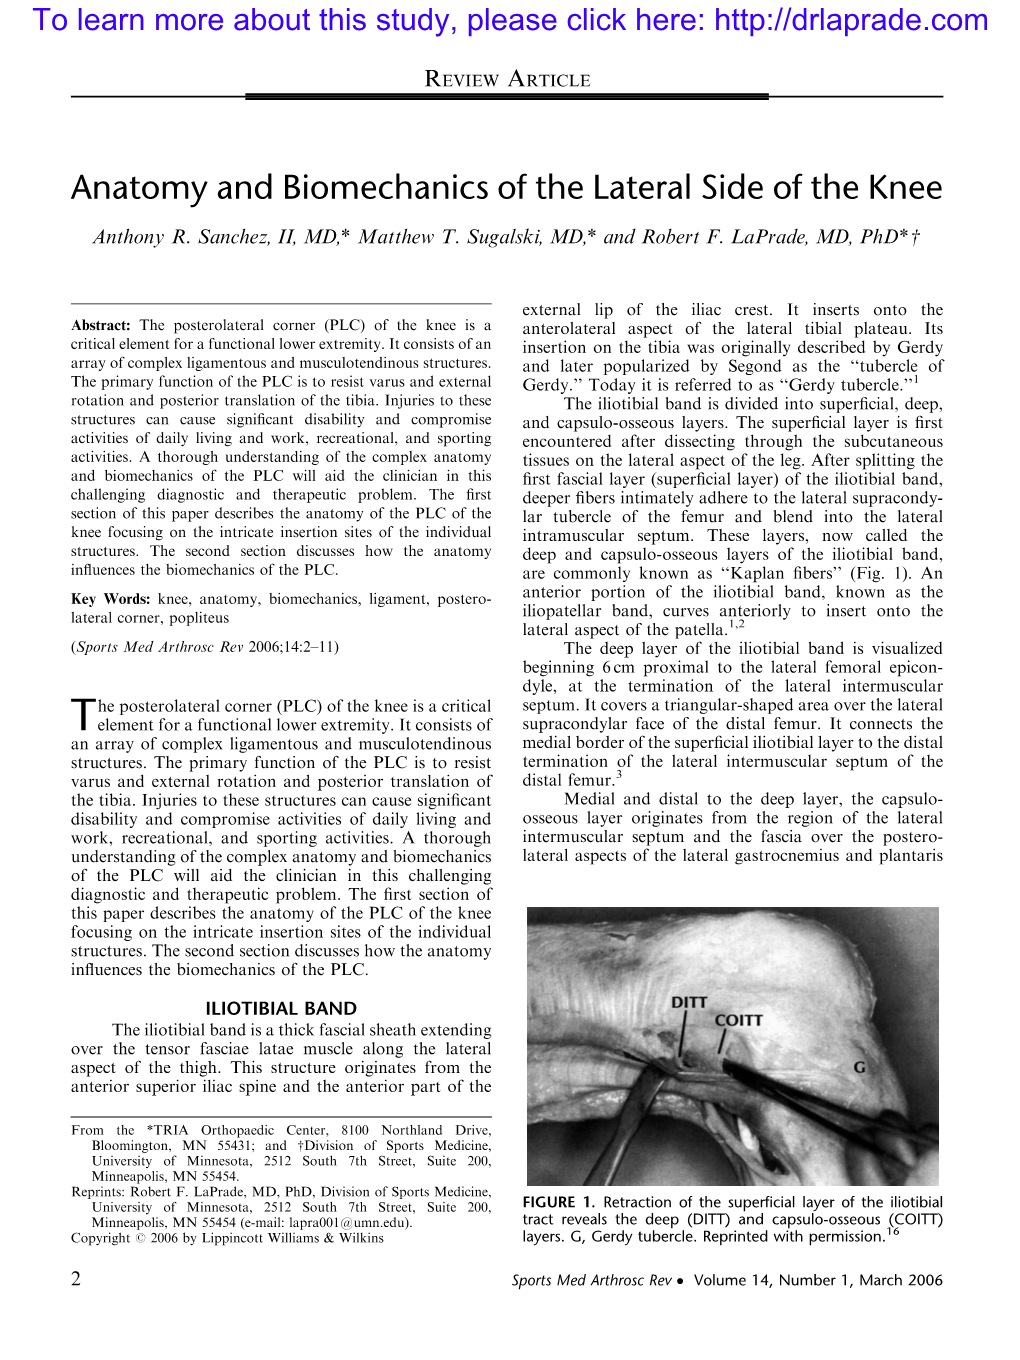 Anatomy and Biomechanics of the Lateral Side of the Knee